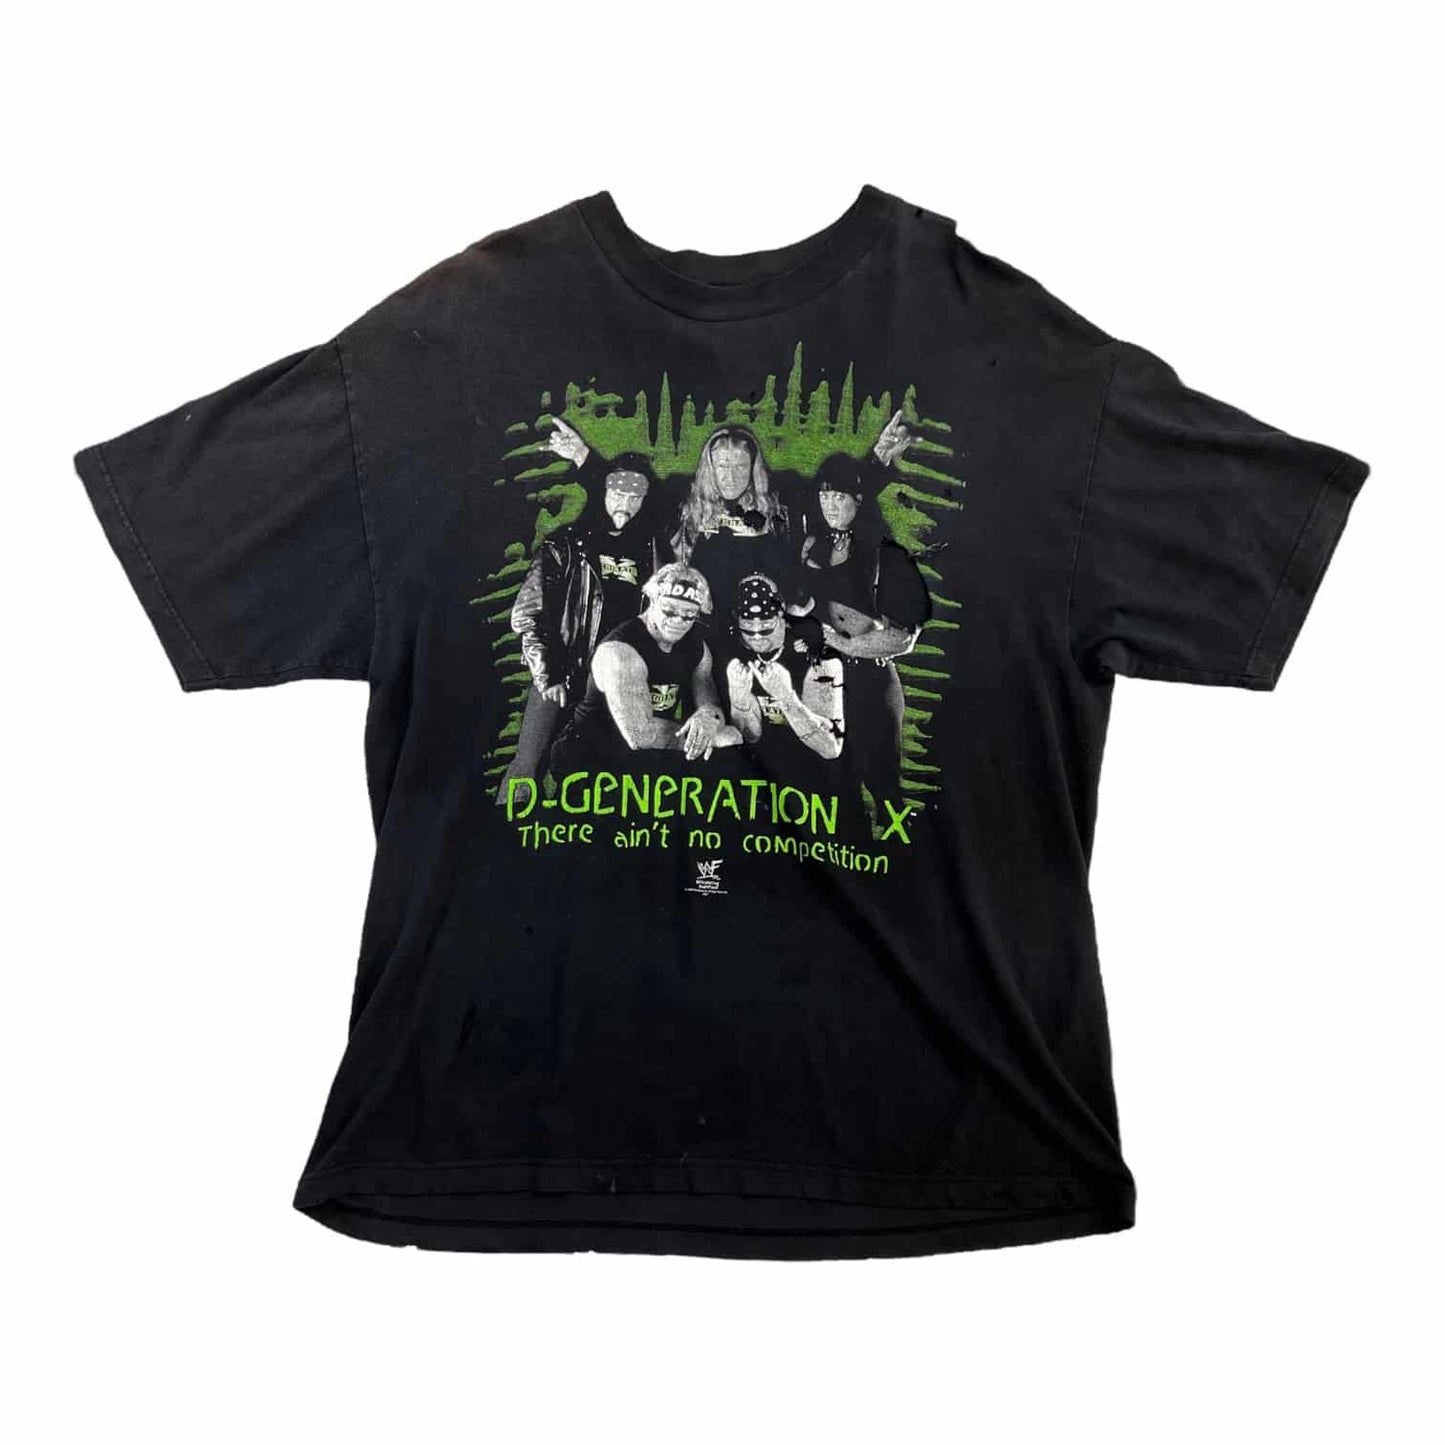 1998 d-generation x there ain’t no competition vintage wrestling tee